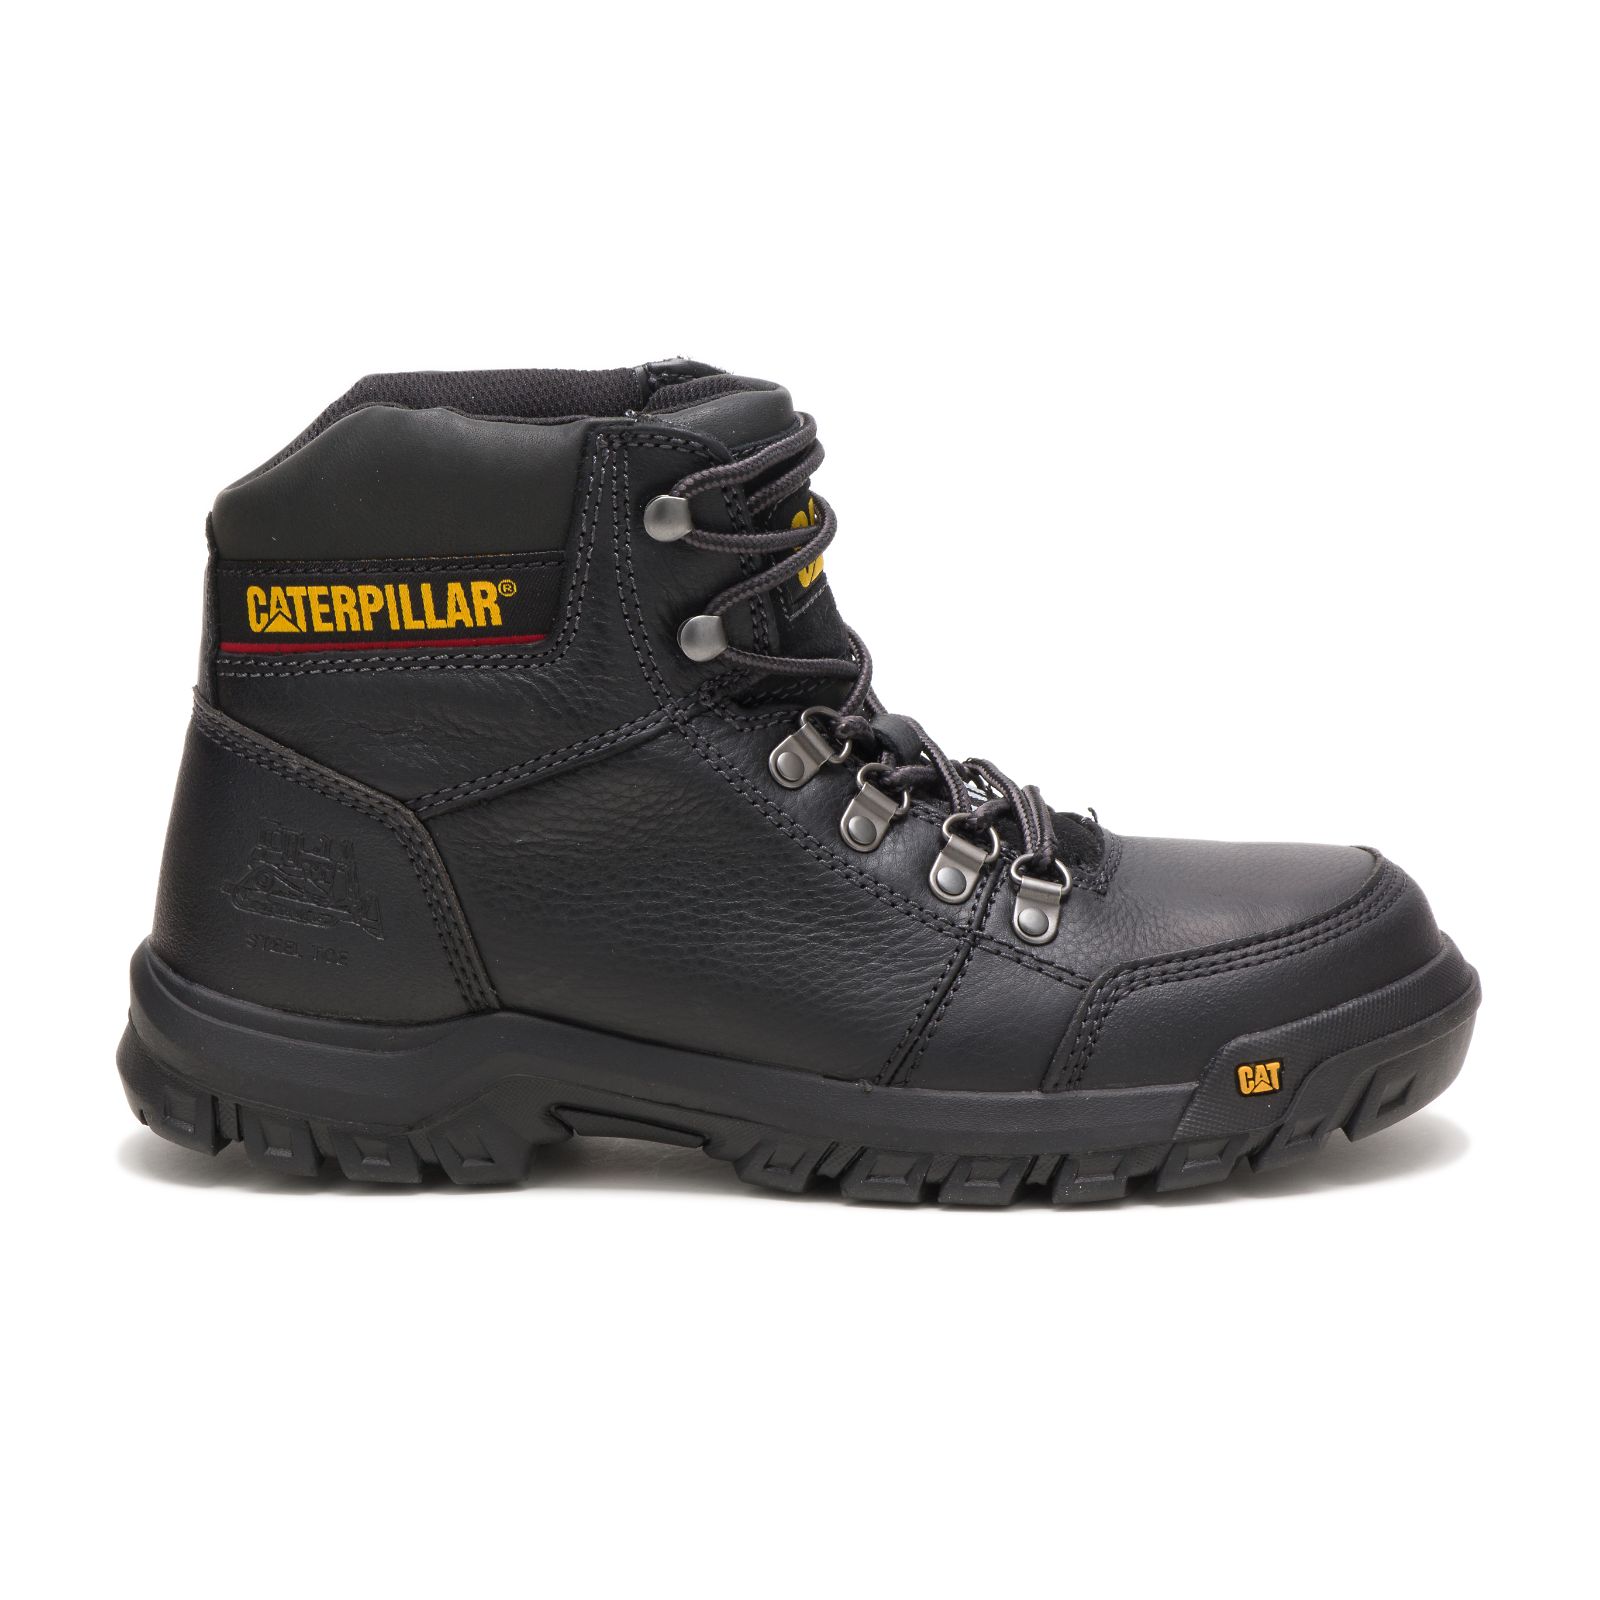 Caterpillar Outline Steel Toe Philippines - Mens Work Boots - Black 29145PZYD